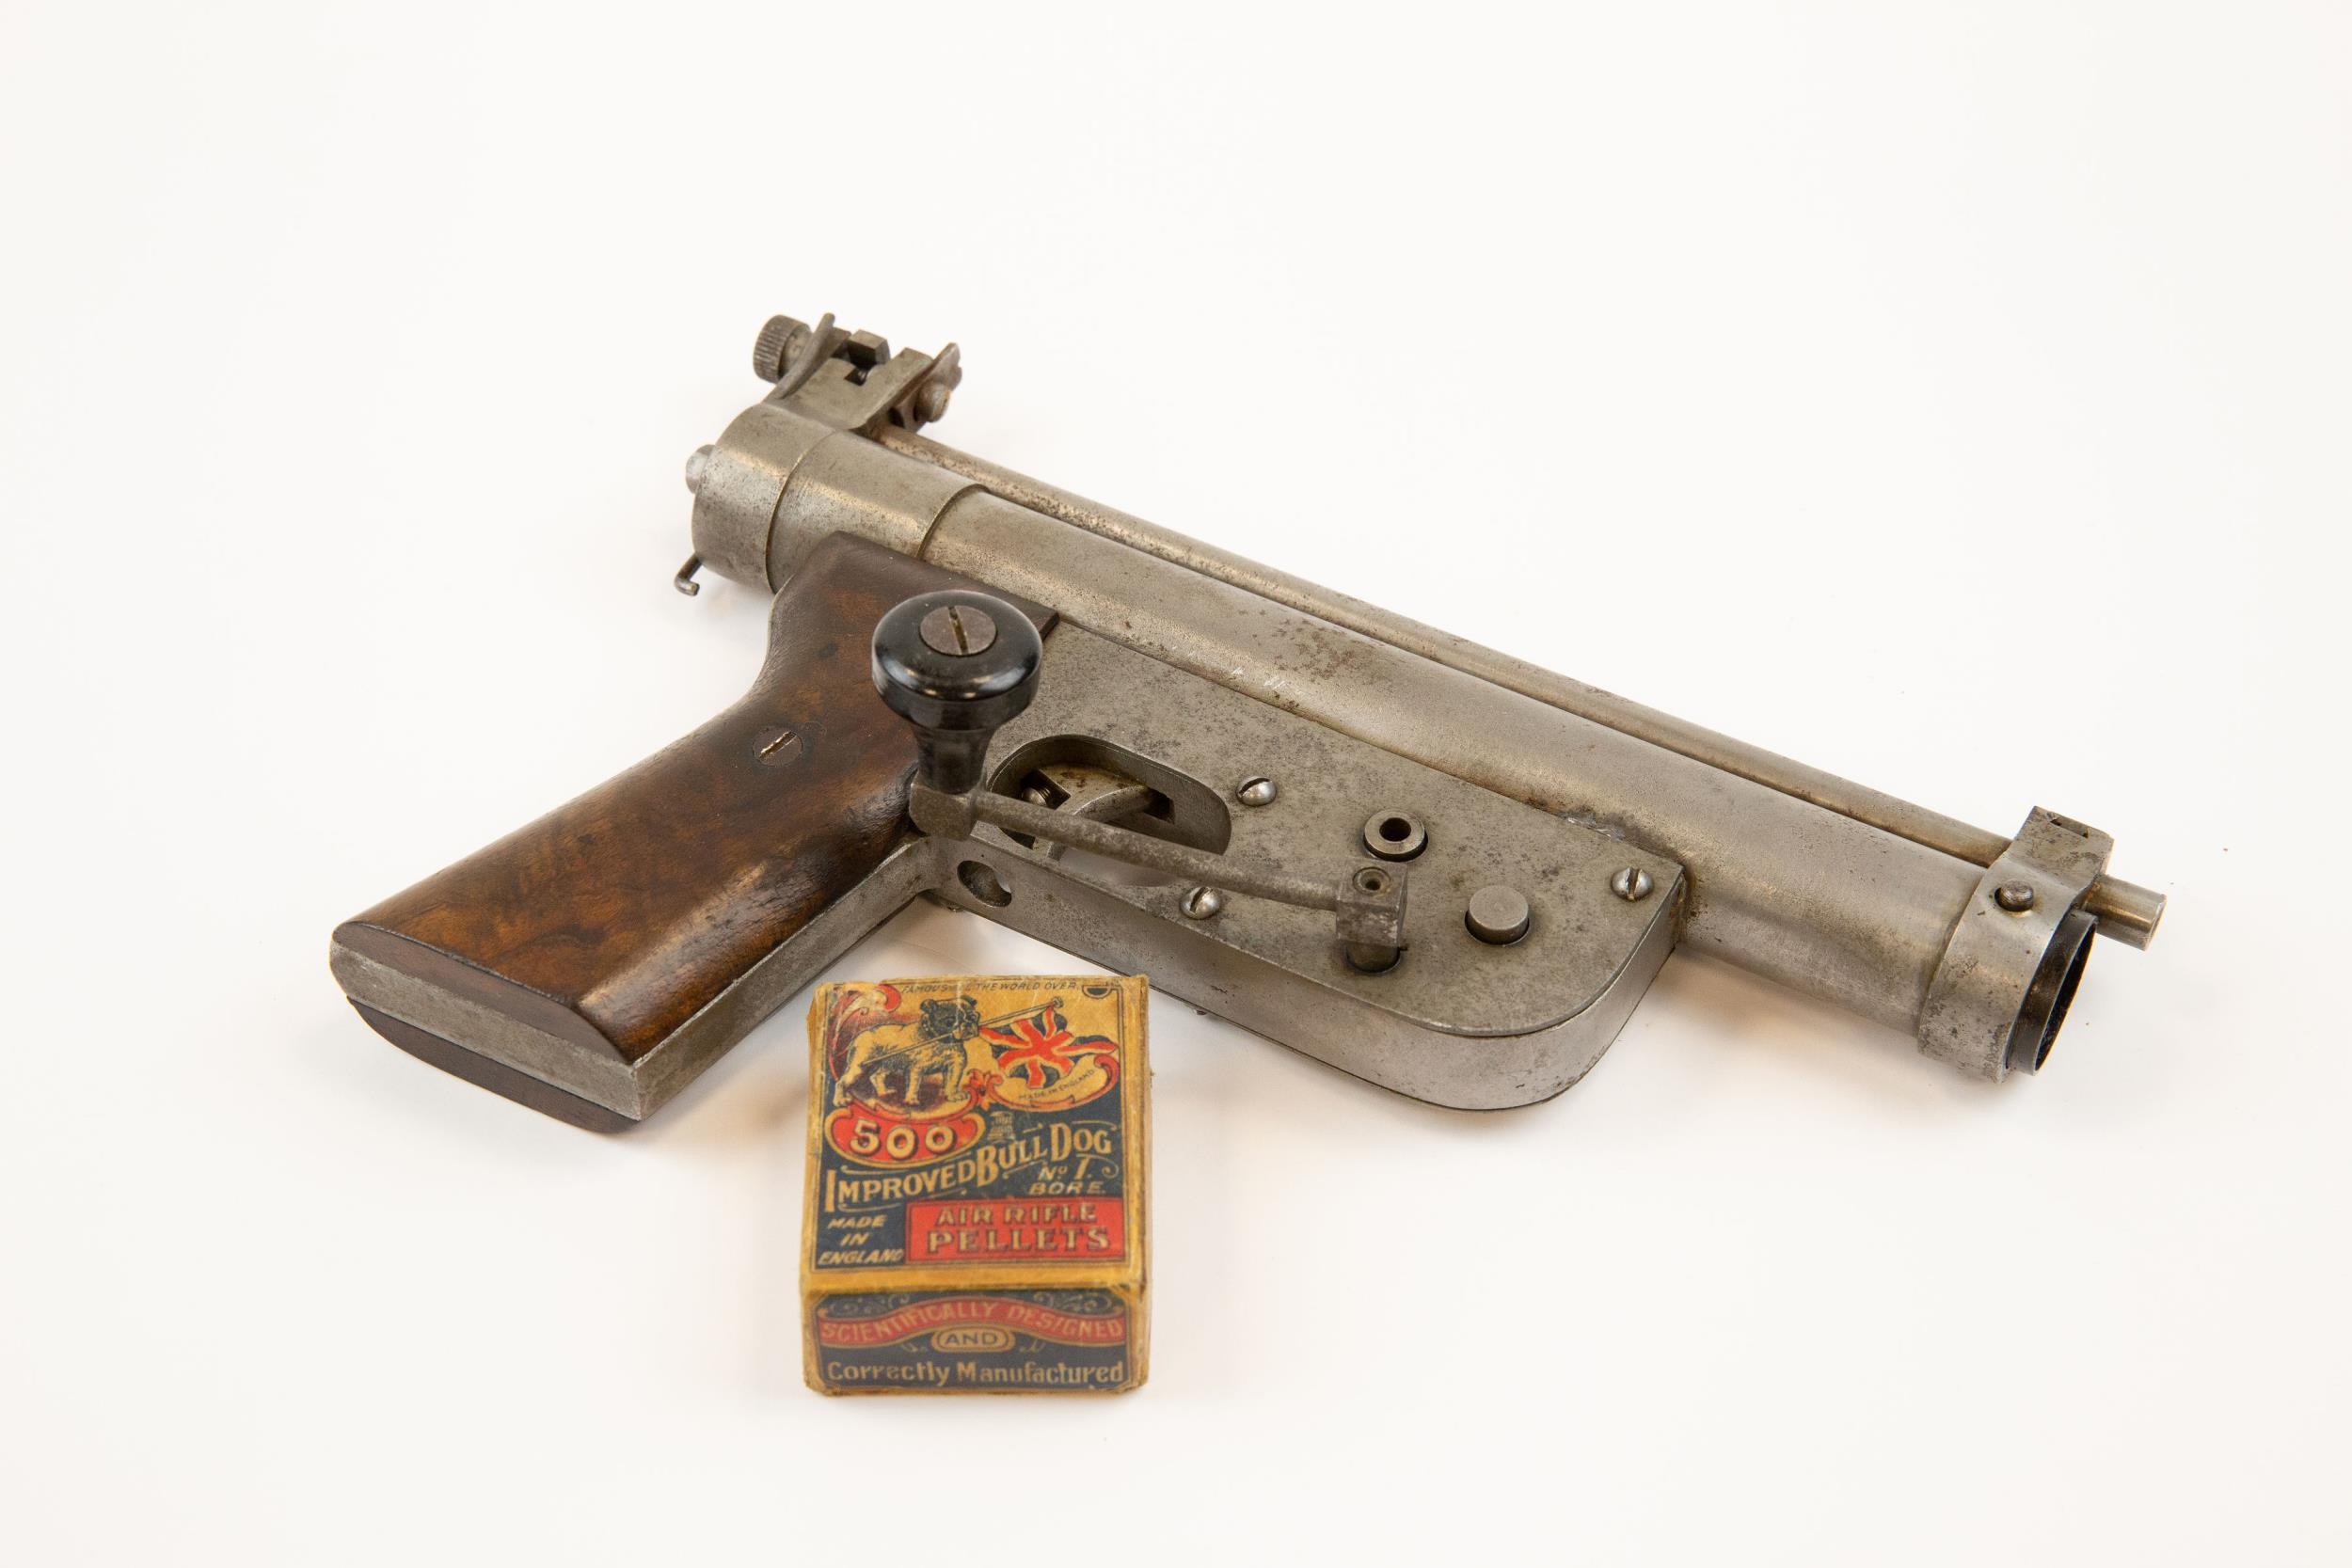 A rare .177" Parker Patent Precision crank wound air pistol, number 262, with plain walnut grips. - Image 2 of 3